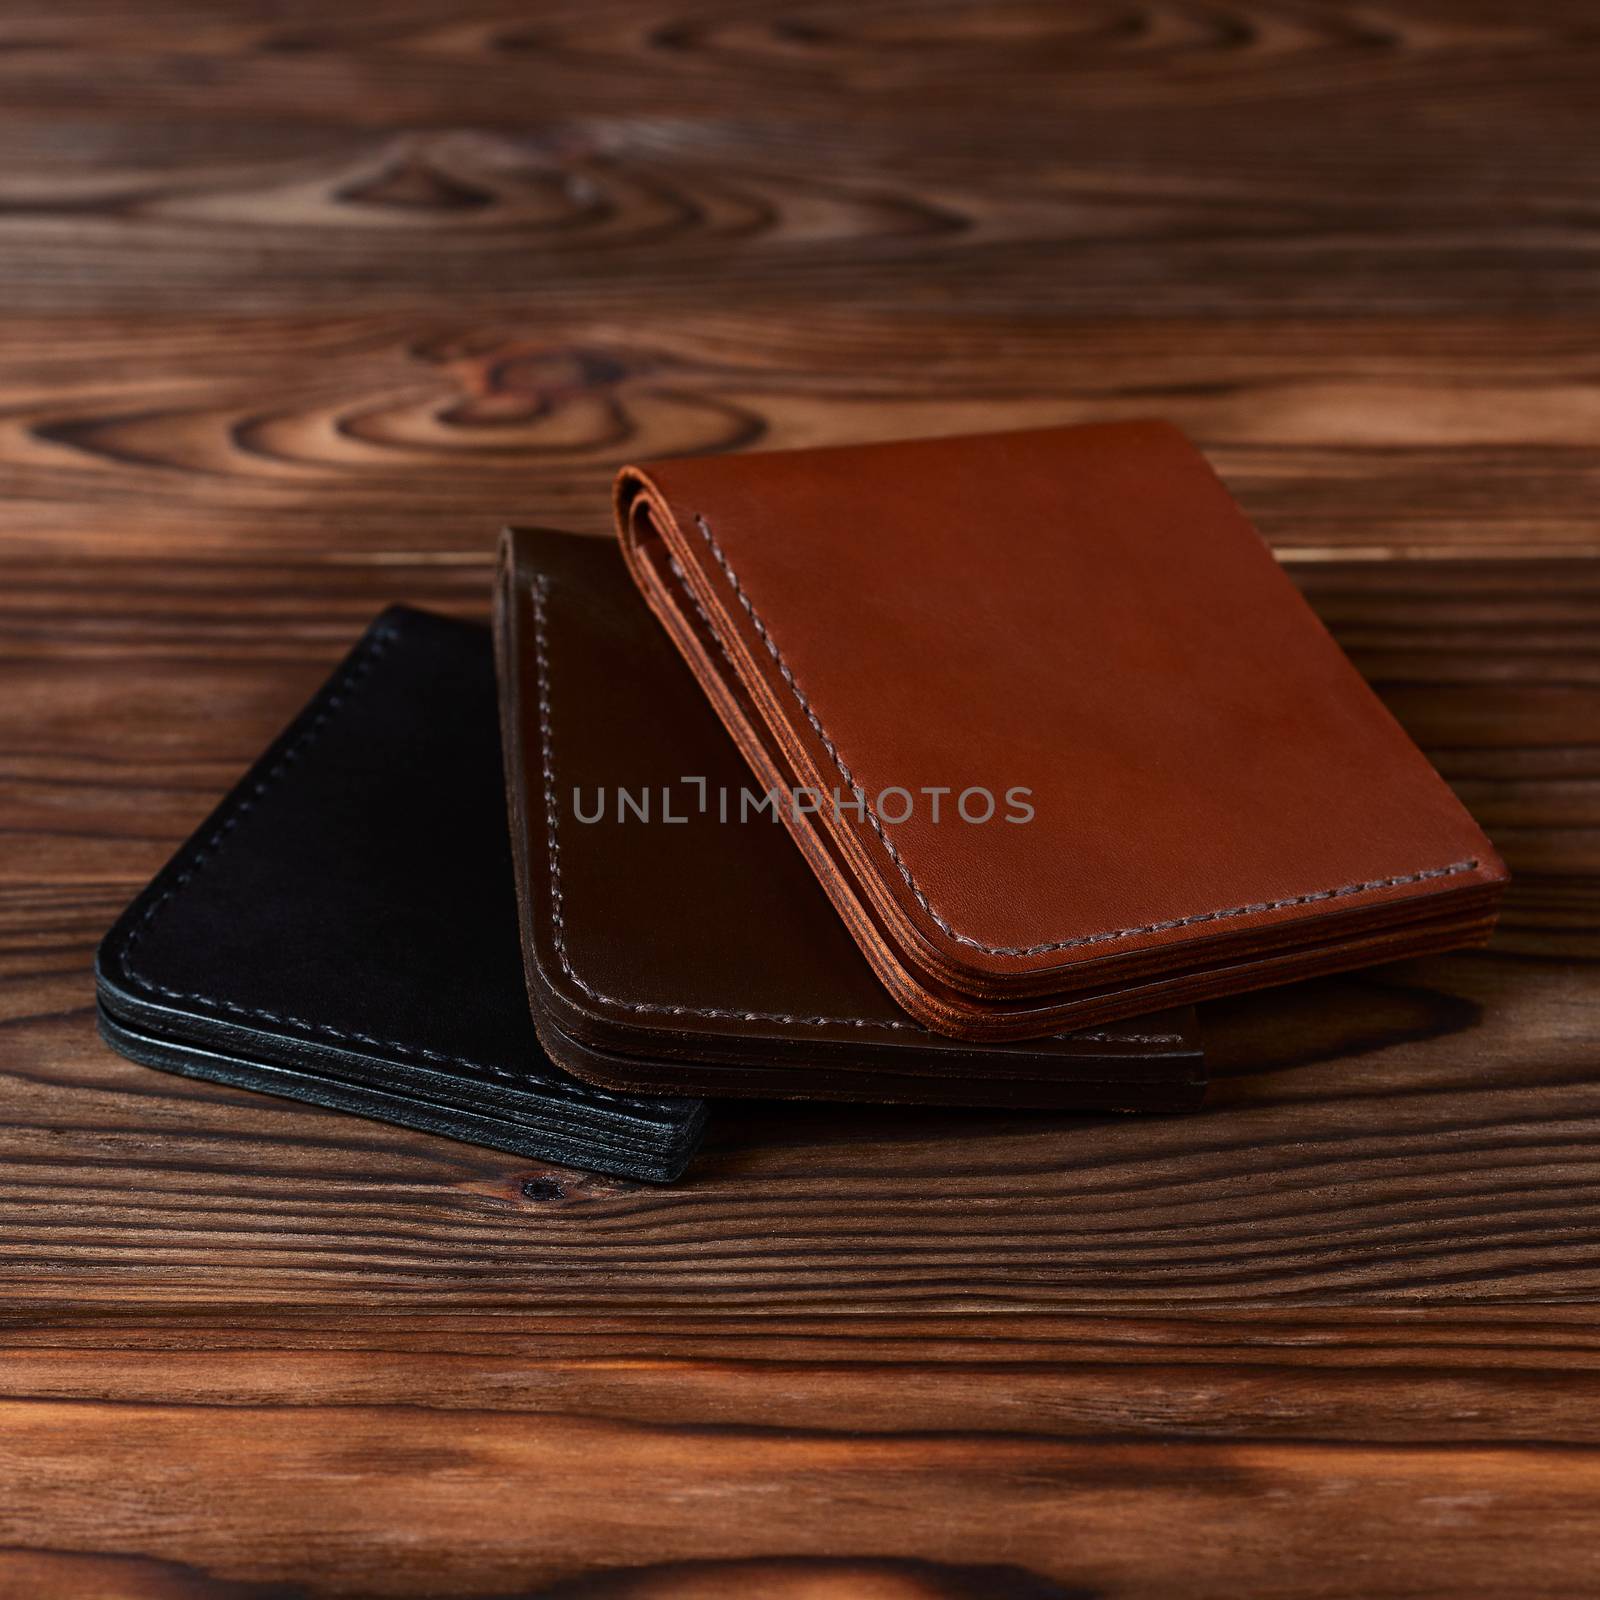 Three handmade leather wallets on wooden textured background. closeup. Wallet stock photo.